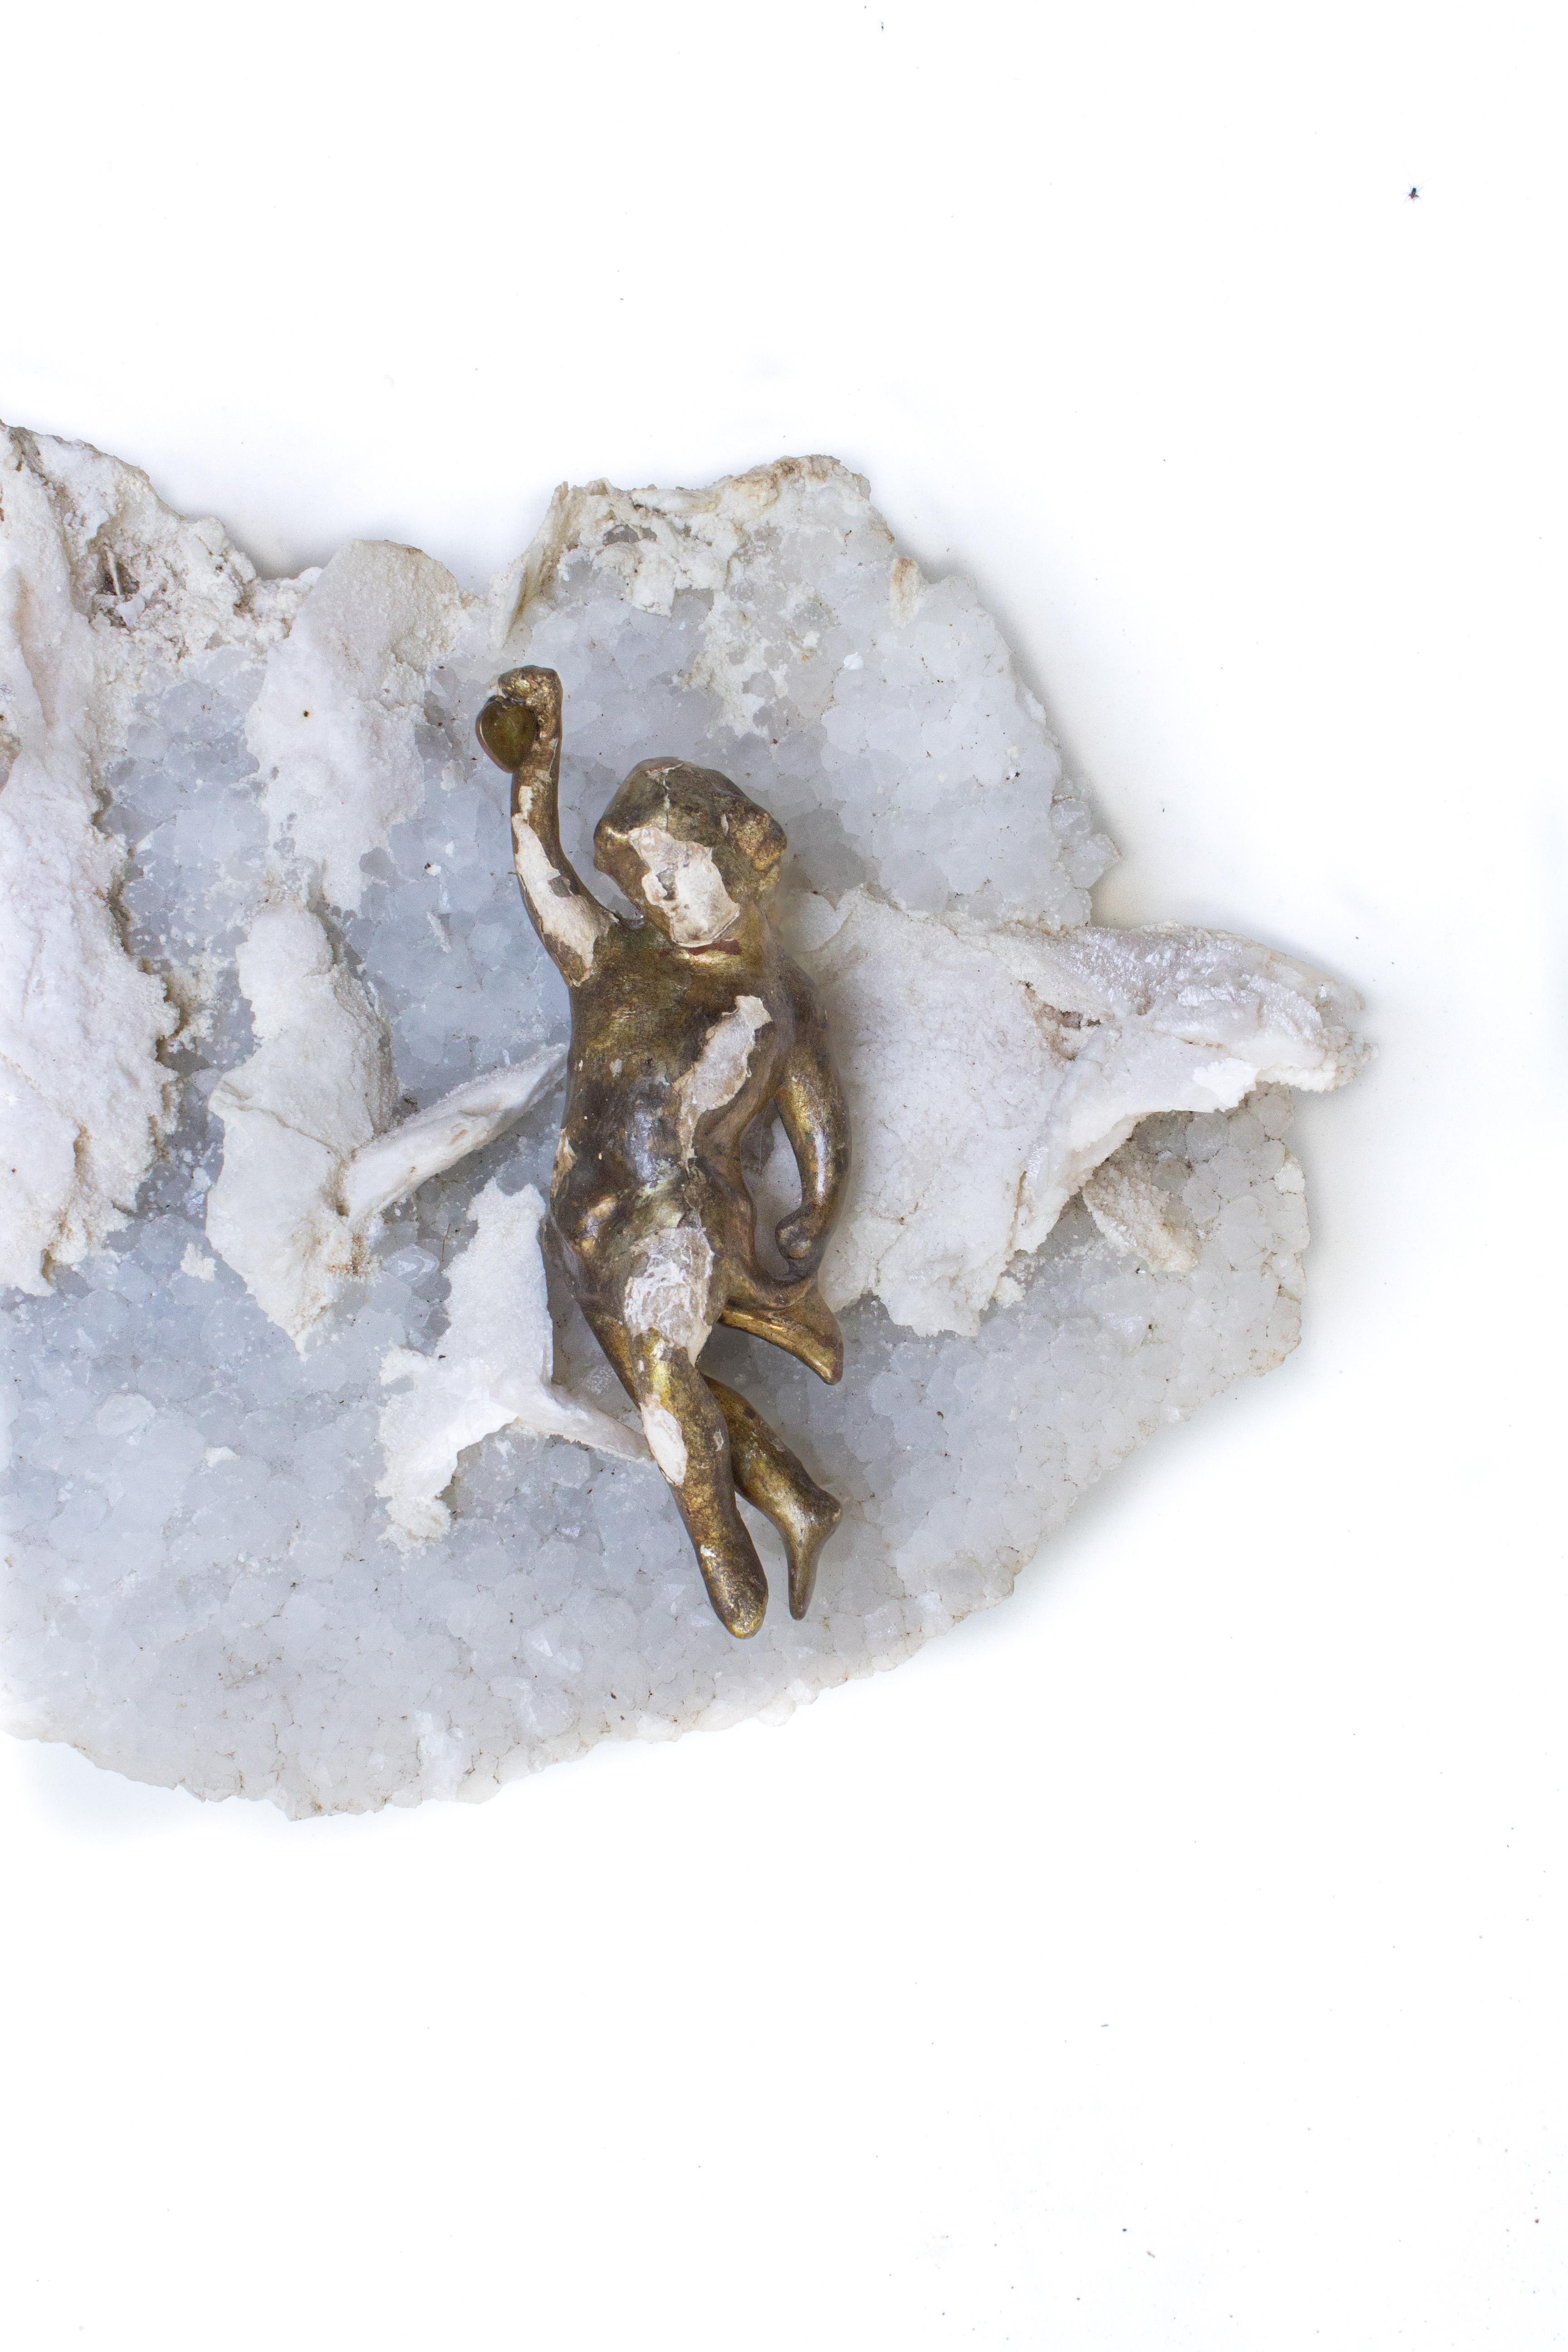 18th Century Italian Gilded Angels on Amethyst and Calcite in Matrix In Good Condition For Sale In Dublin, Dalkey